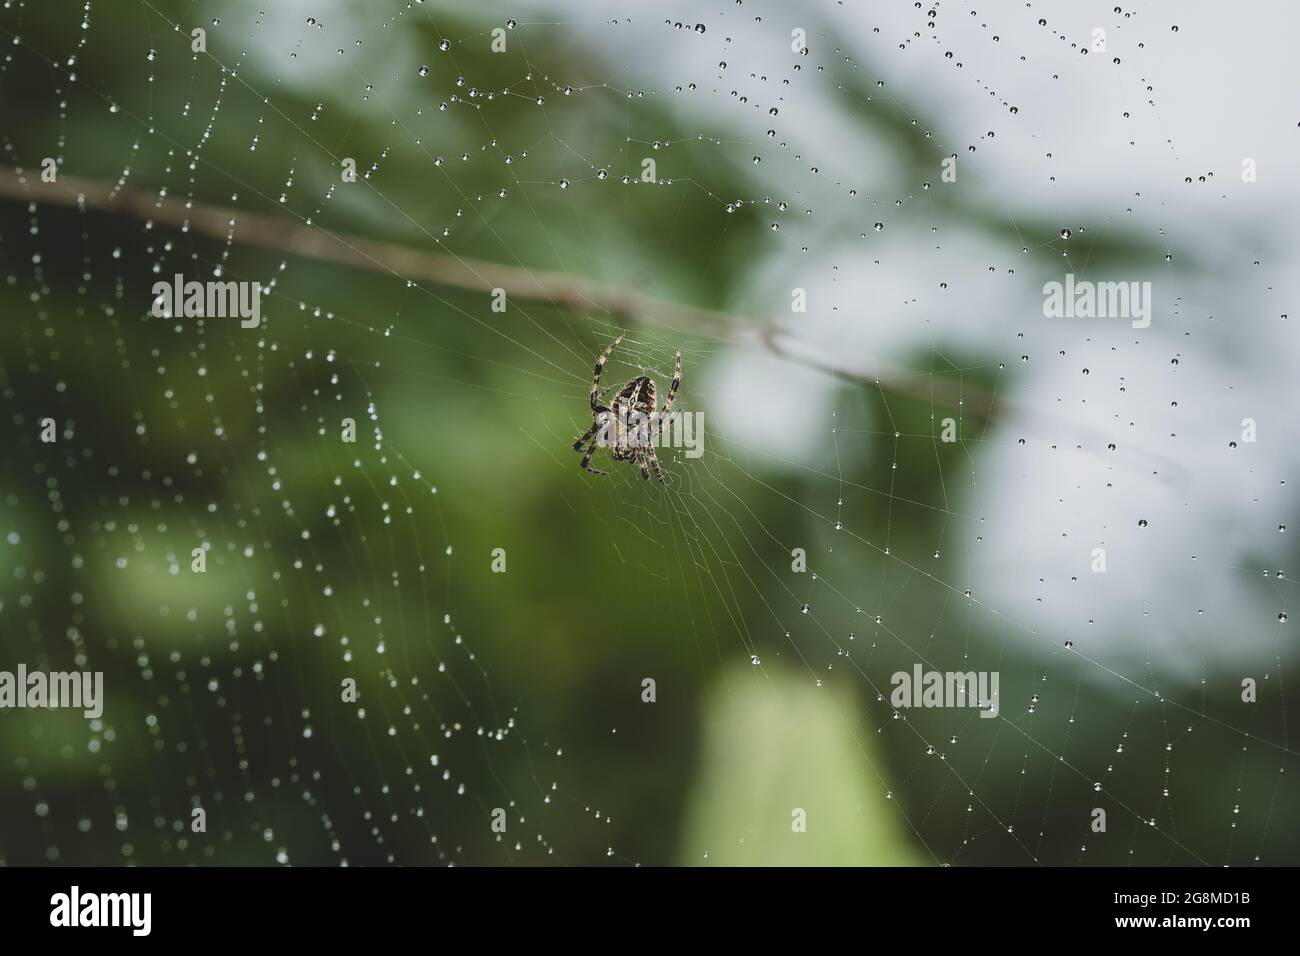 Picture of water droplets trapped in the spider web of Neoscona mukheerjee Stock Photo